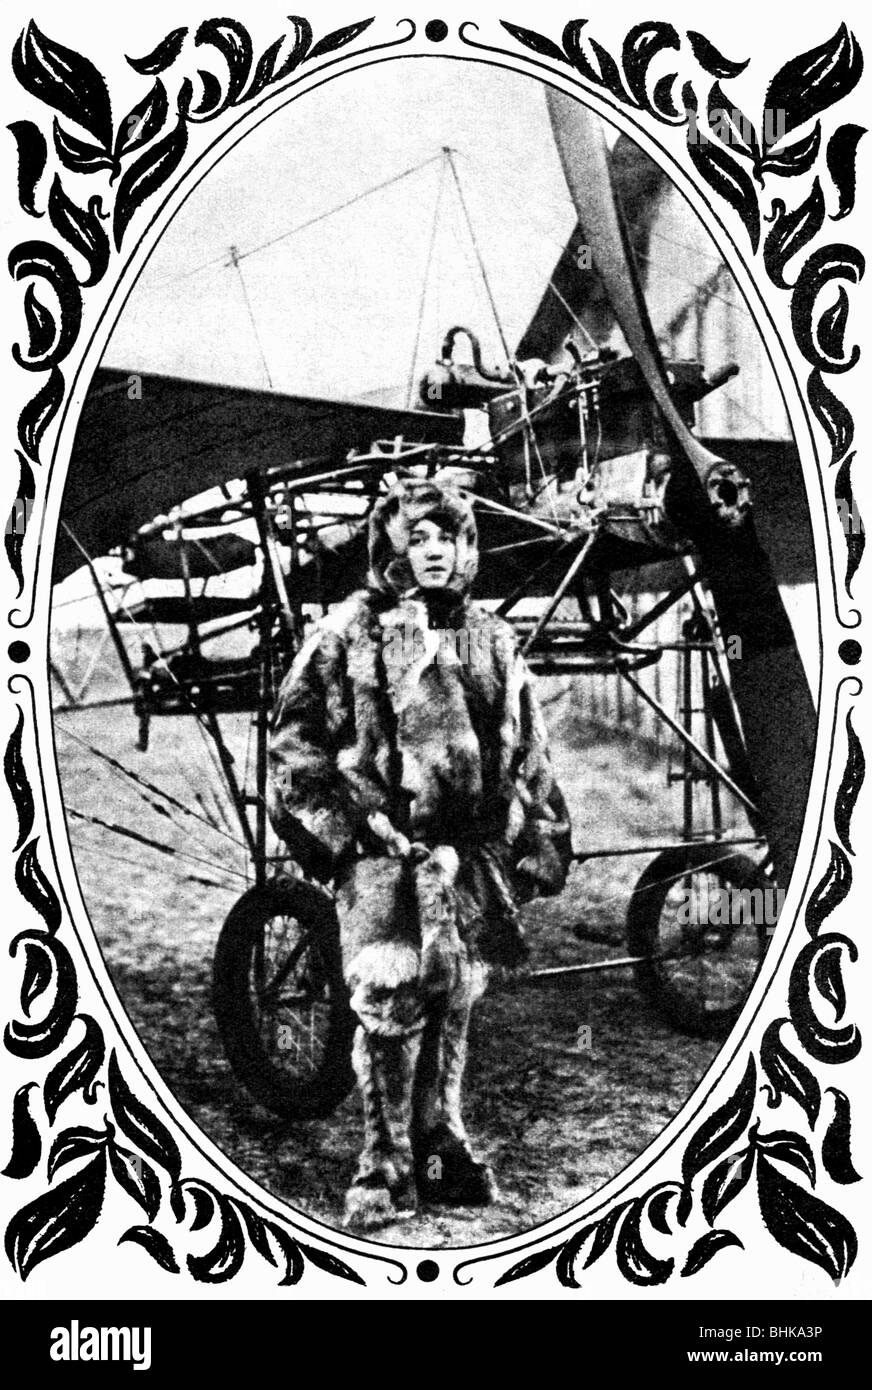 Beese, Amelie Hedwig 'Melli', 13.9.1886 - 22.12.1925, German aviator, full length, in front of an Rumpler aircraft, 1911, , Stock Photo